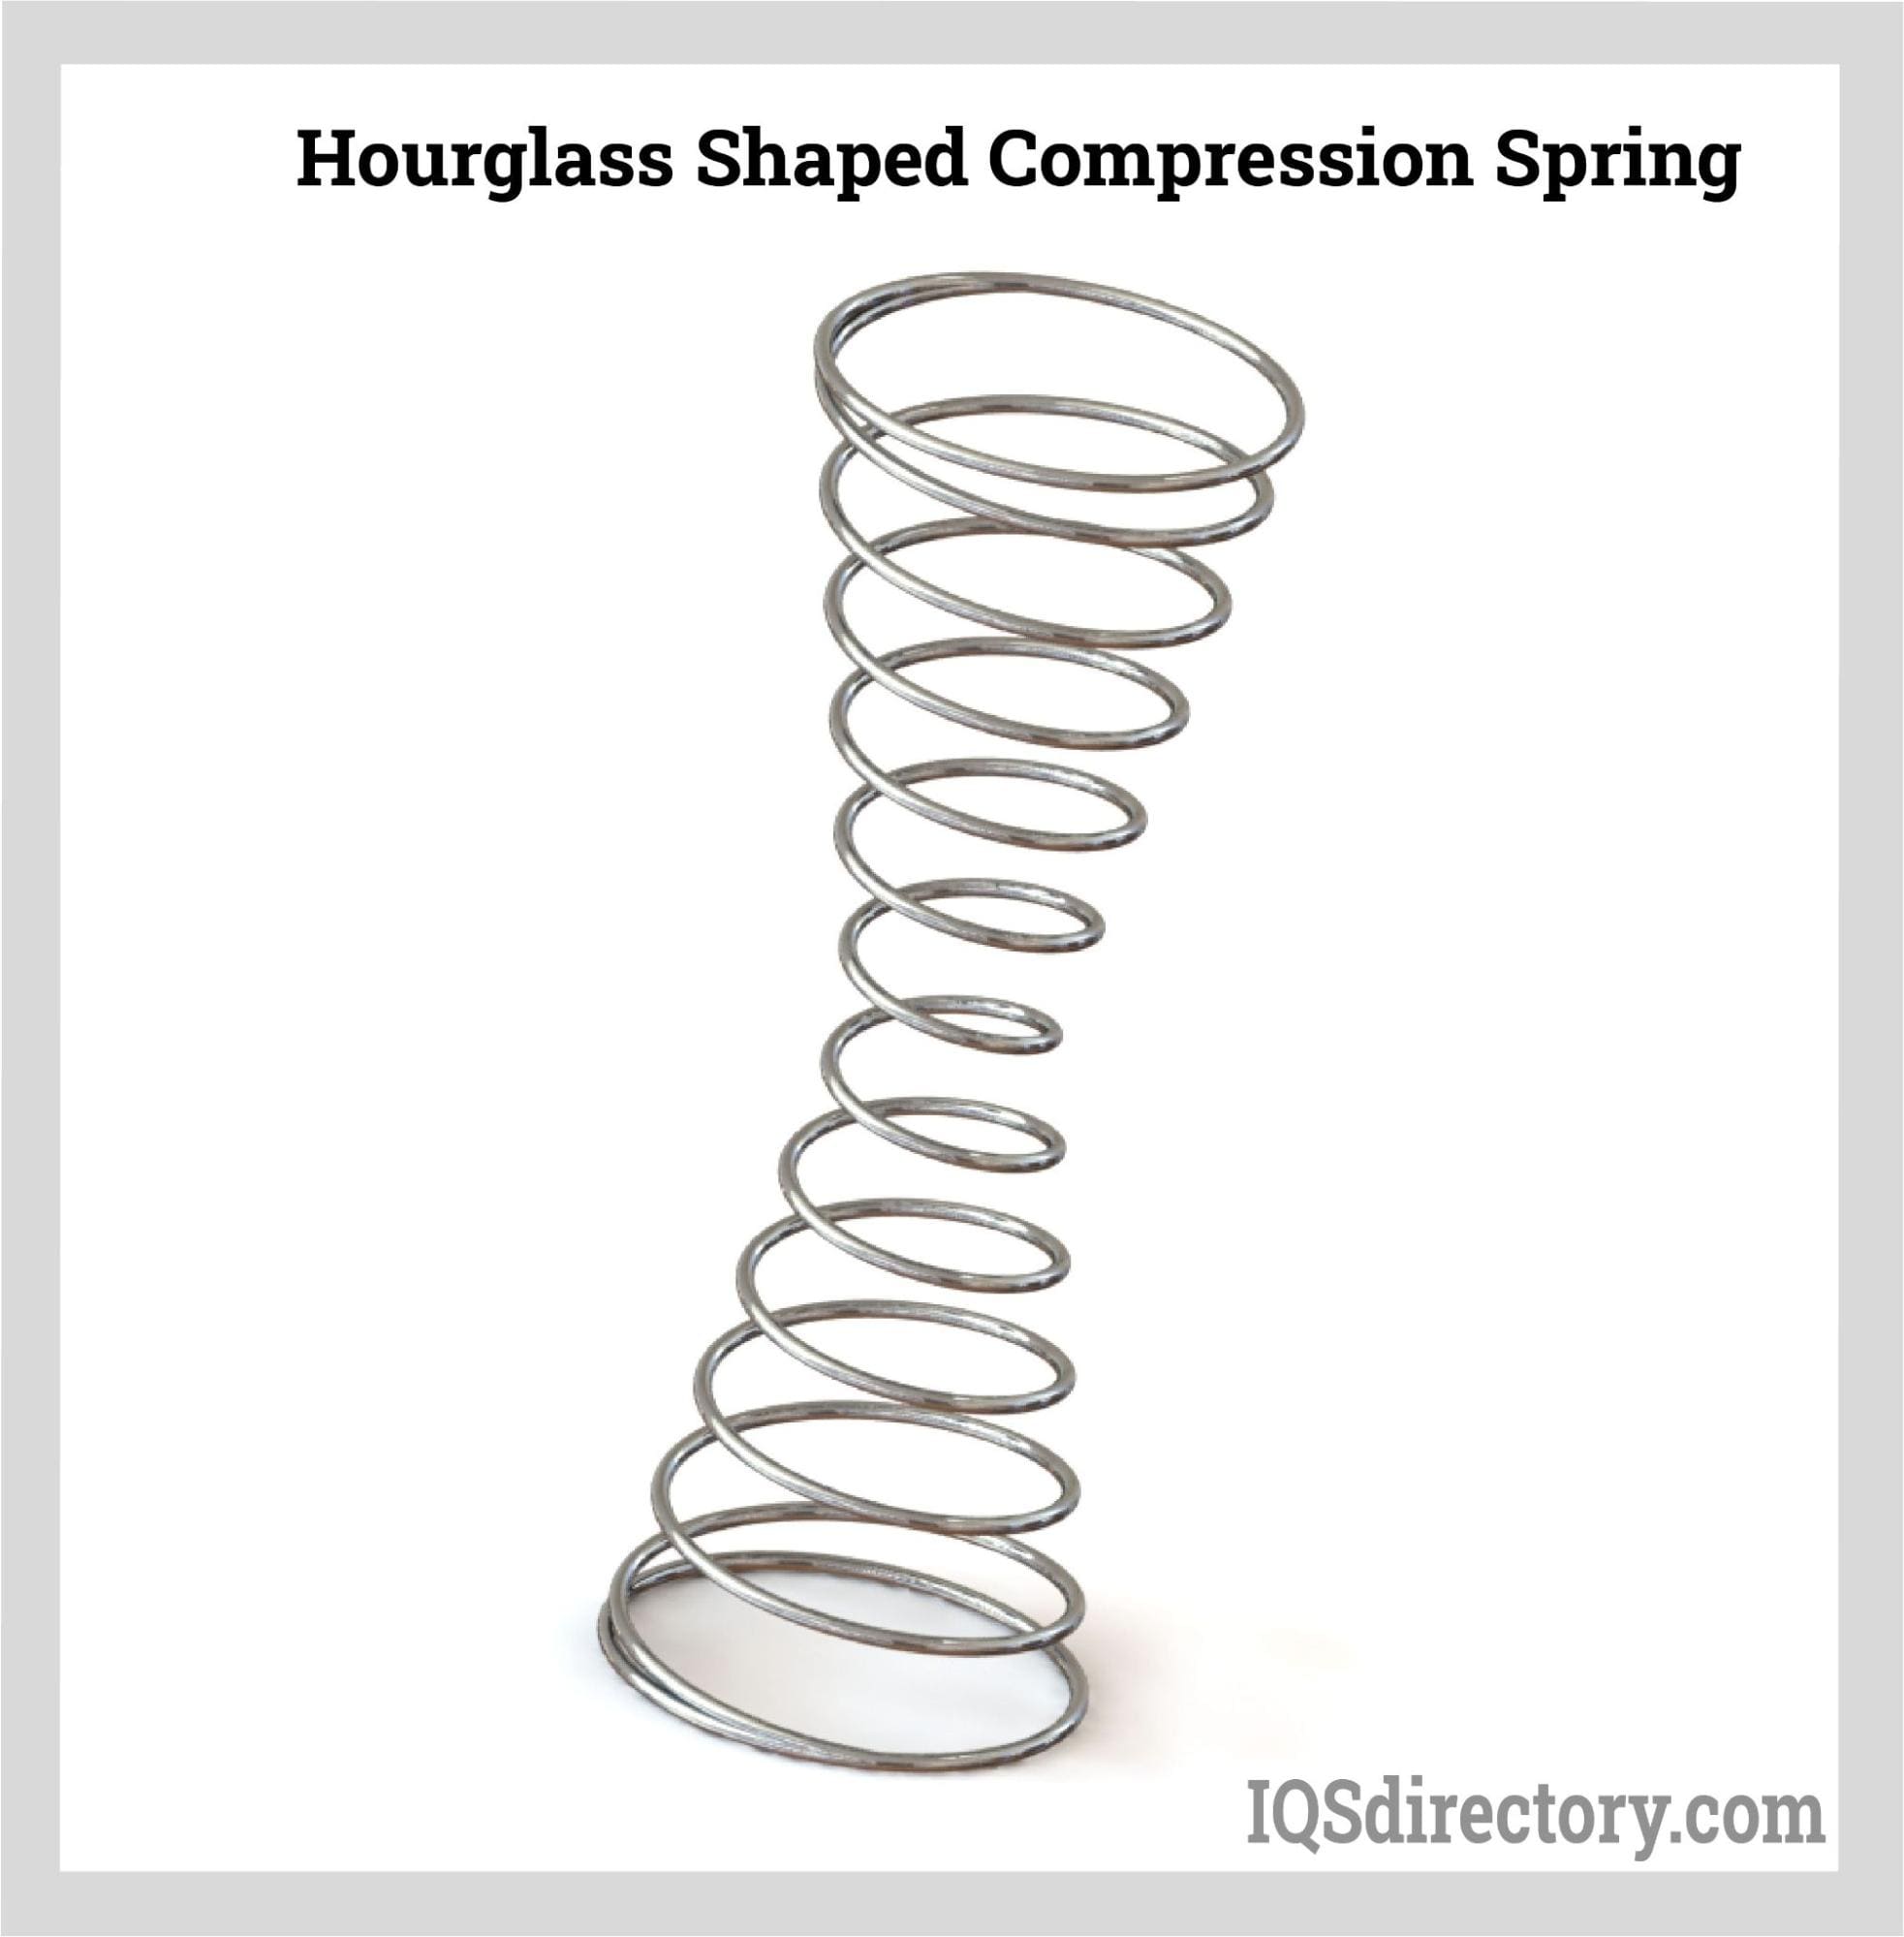 Hourglass Shaped Compression Spring